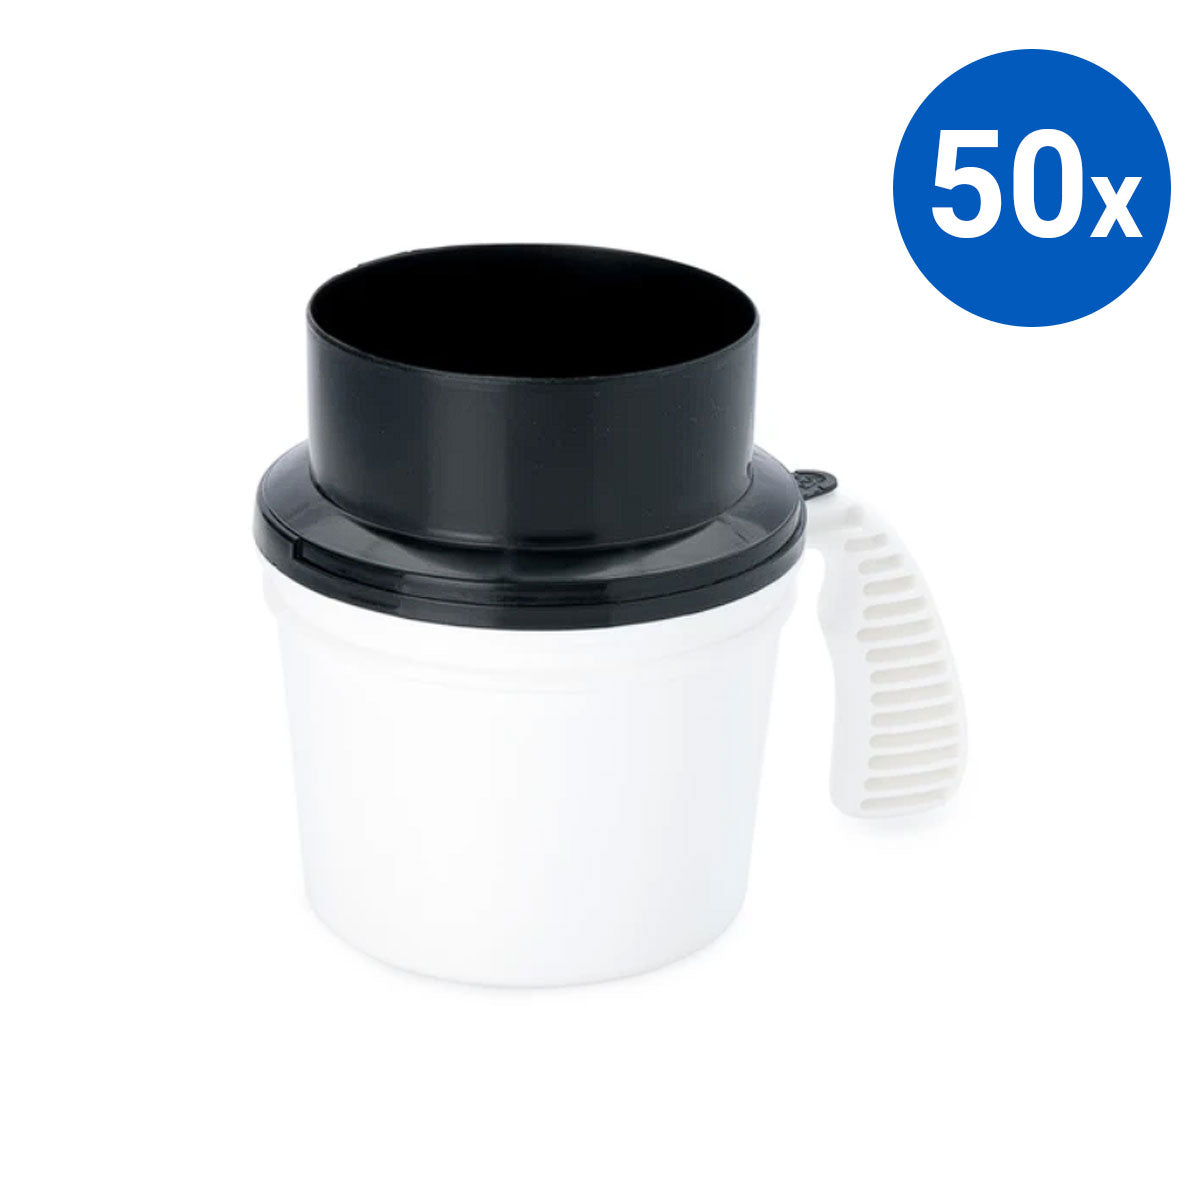 50x Collection Container Base and Quick Drop Lid - Black